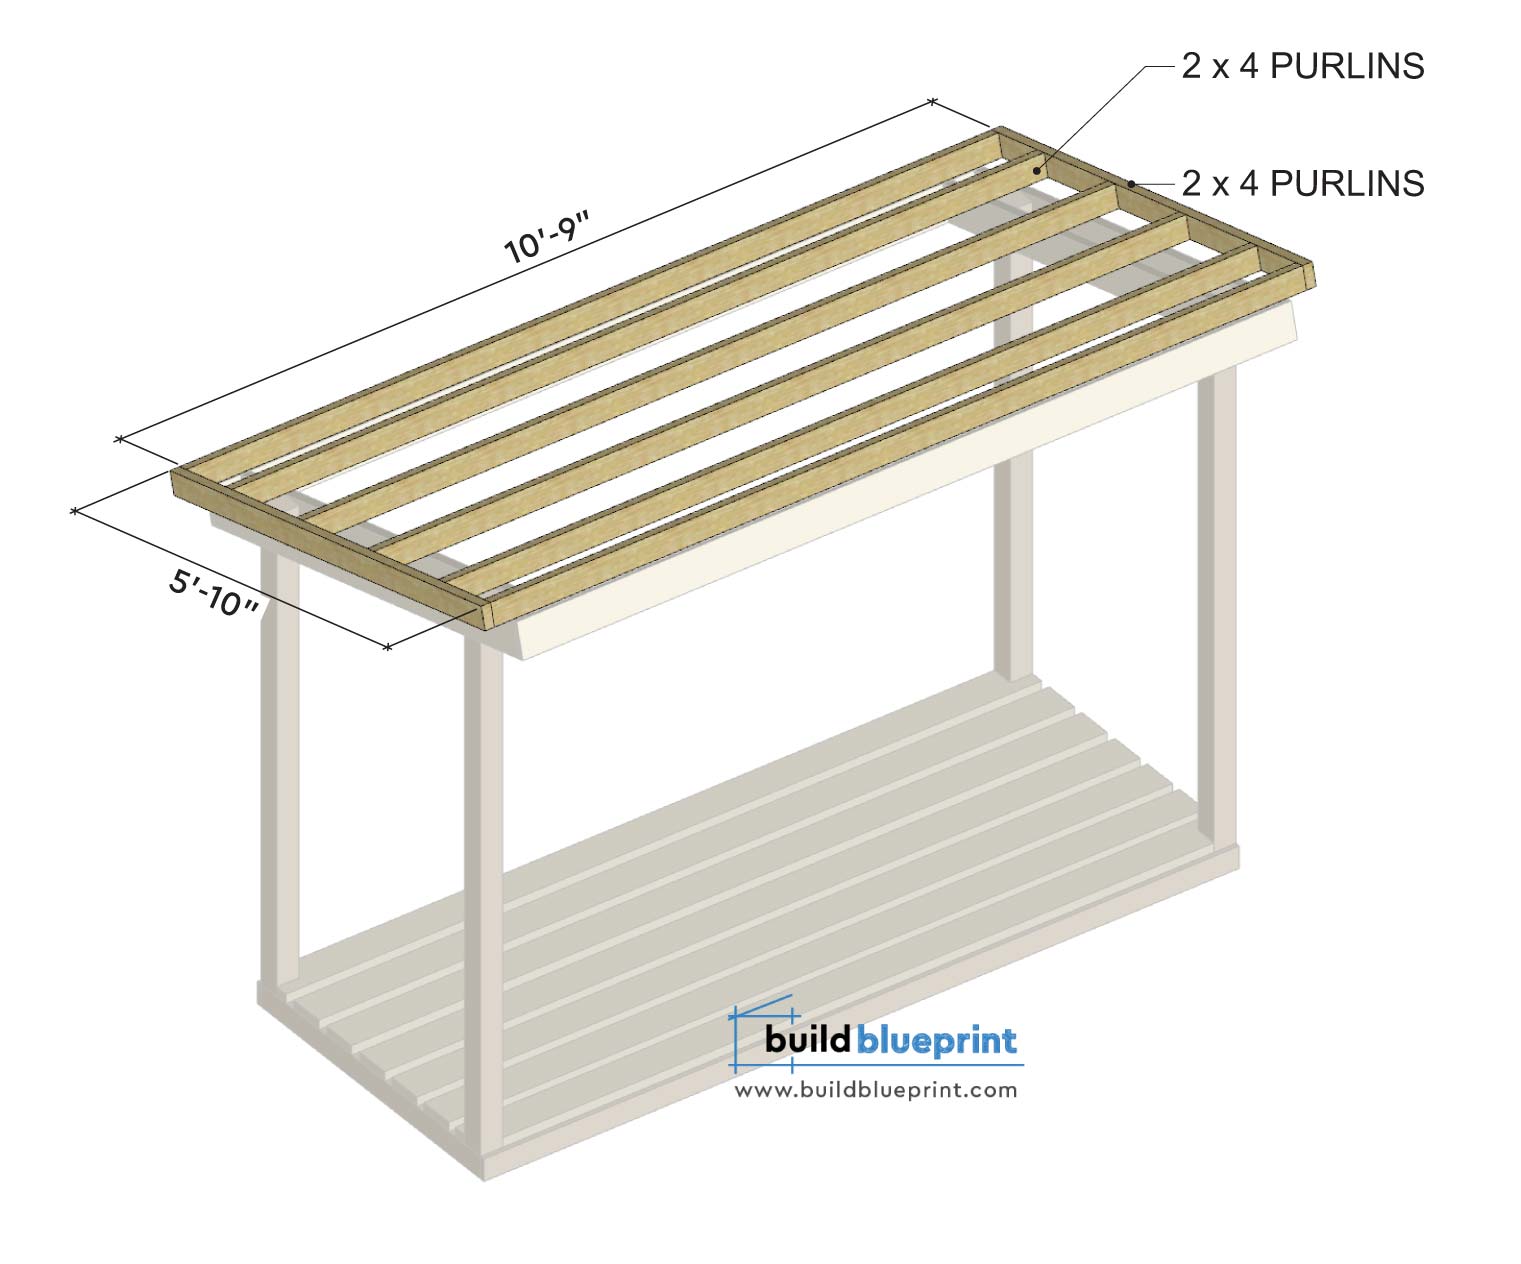 4x10 firewood shed purlins layout